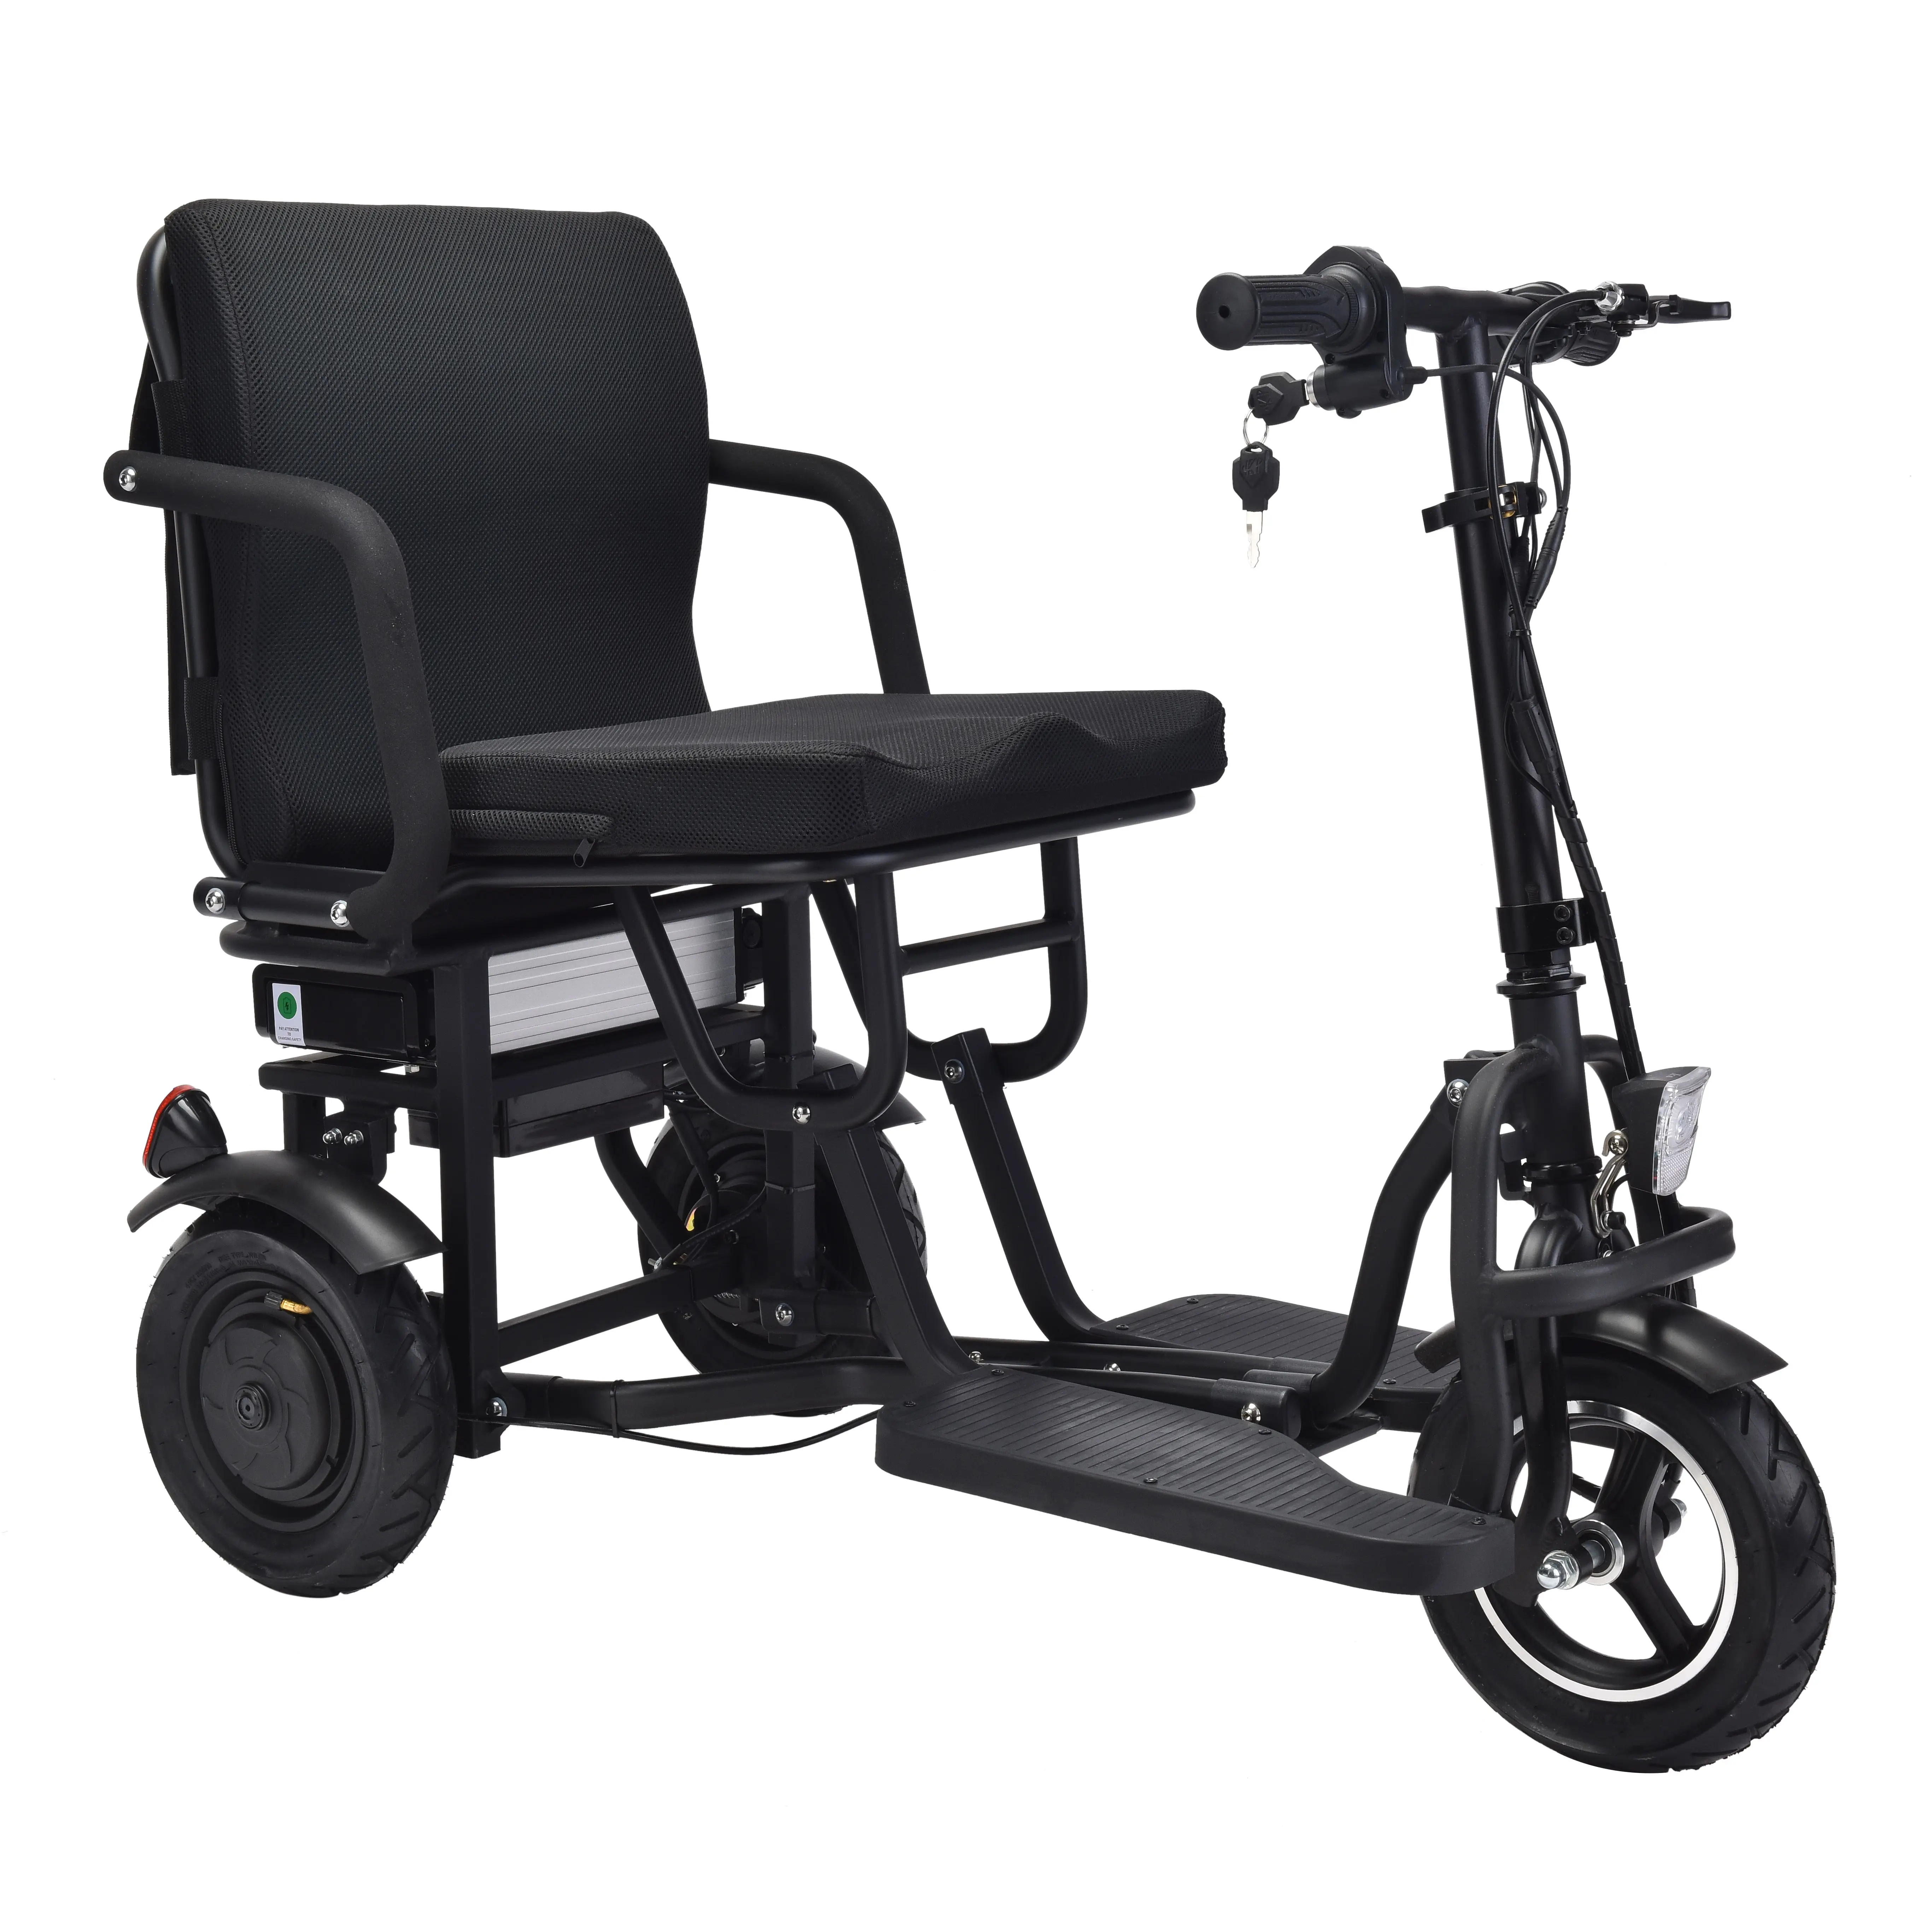 3 Heel talón olbility obility coodult ick oped coocoocooter anandicado coolectric ricricycles Fo ALE ale